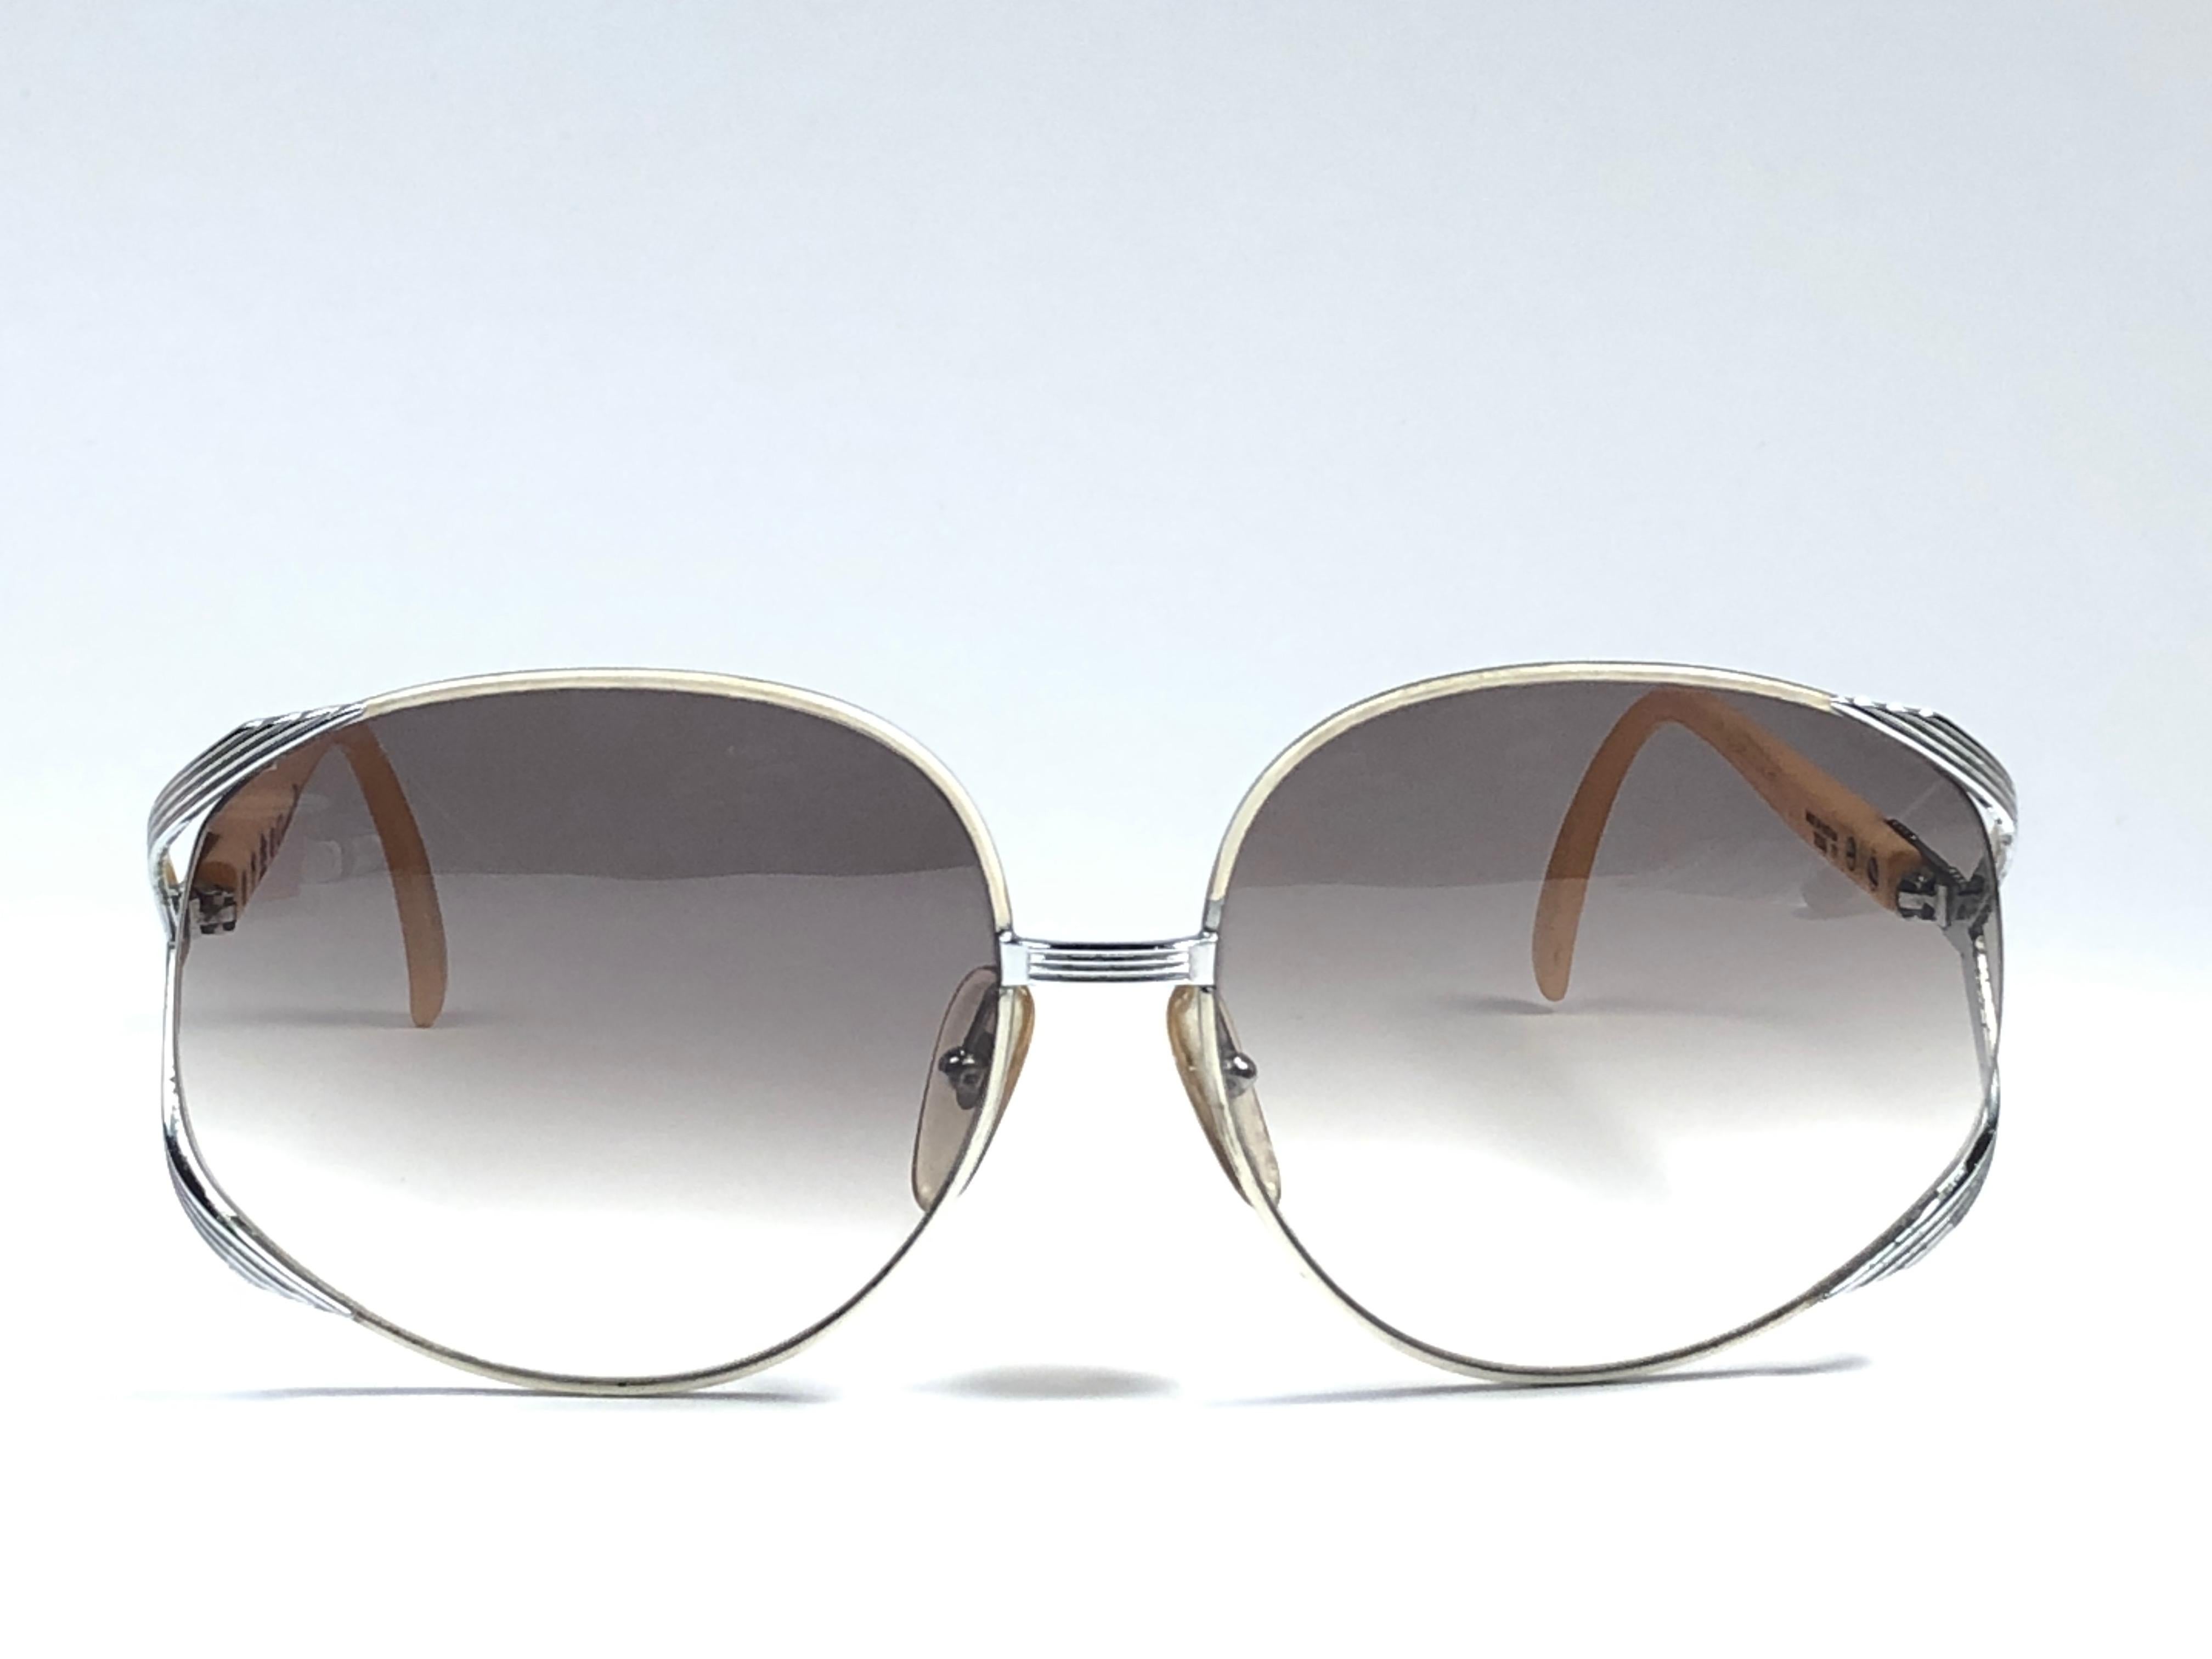 

Highly coveted Christian Dior oversized frame in silver, white and beige combination frame.
Spotless light gradient lenses. A collector’s piece!

Come with its original Christian Dior lunettes sleeve.

New, never worn or displayed. Made in